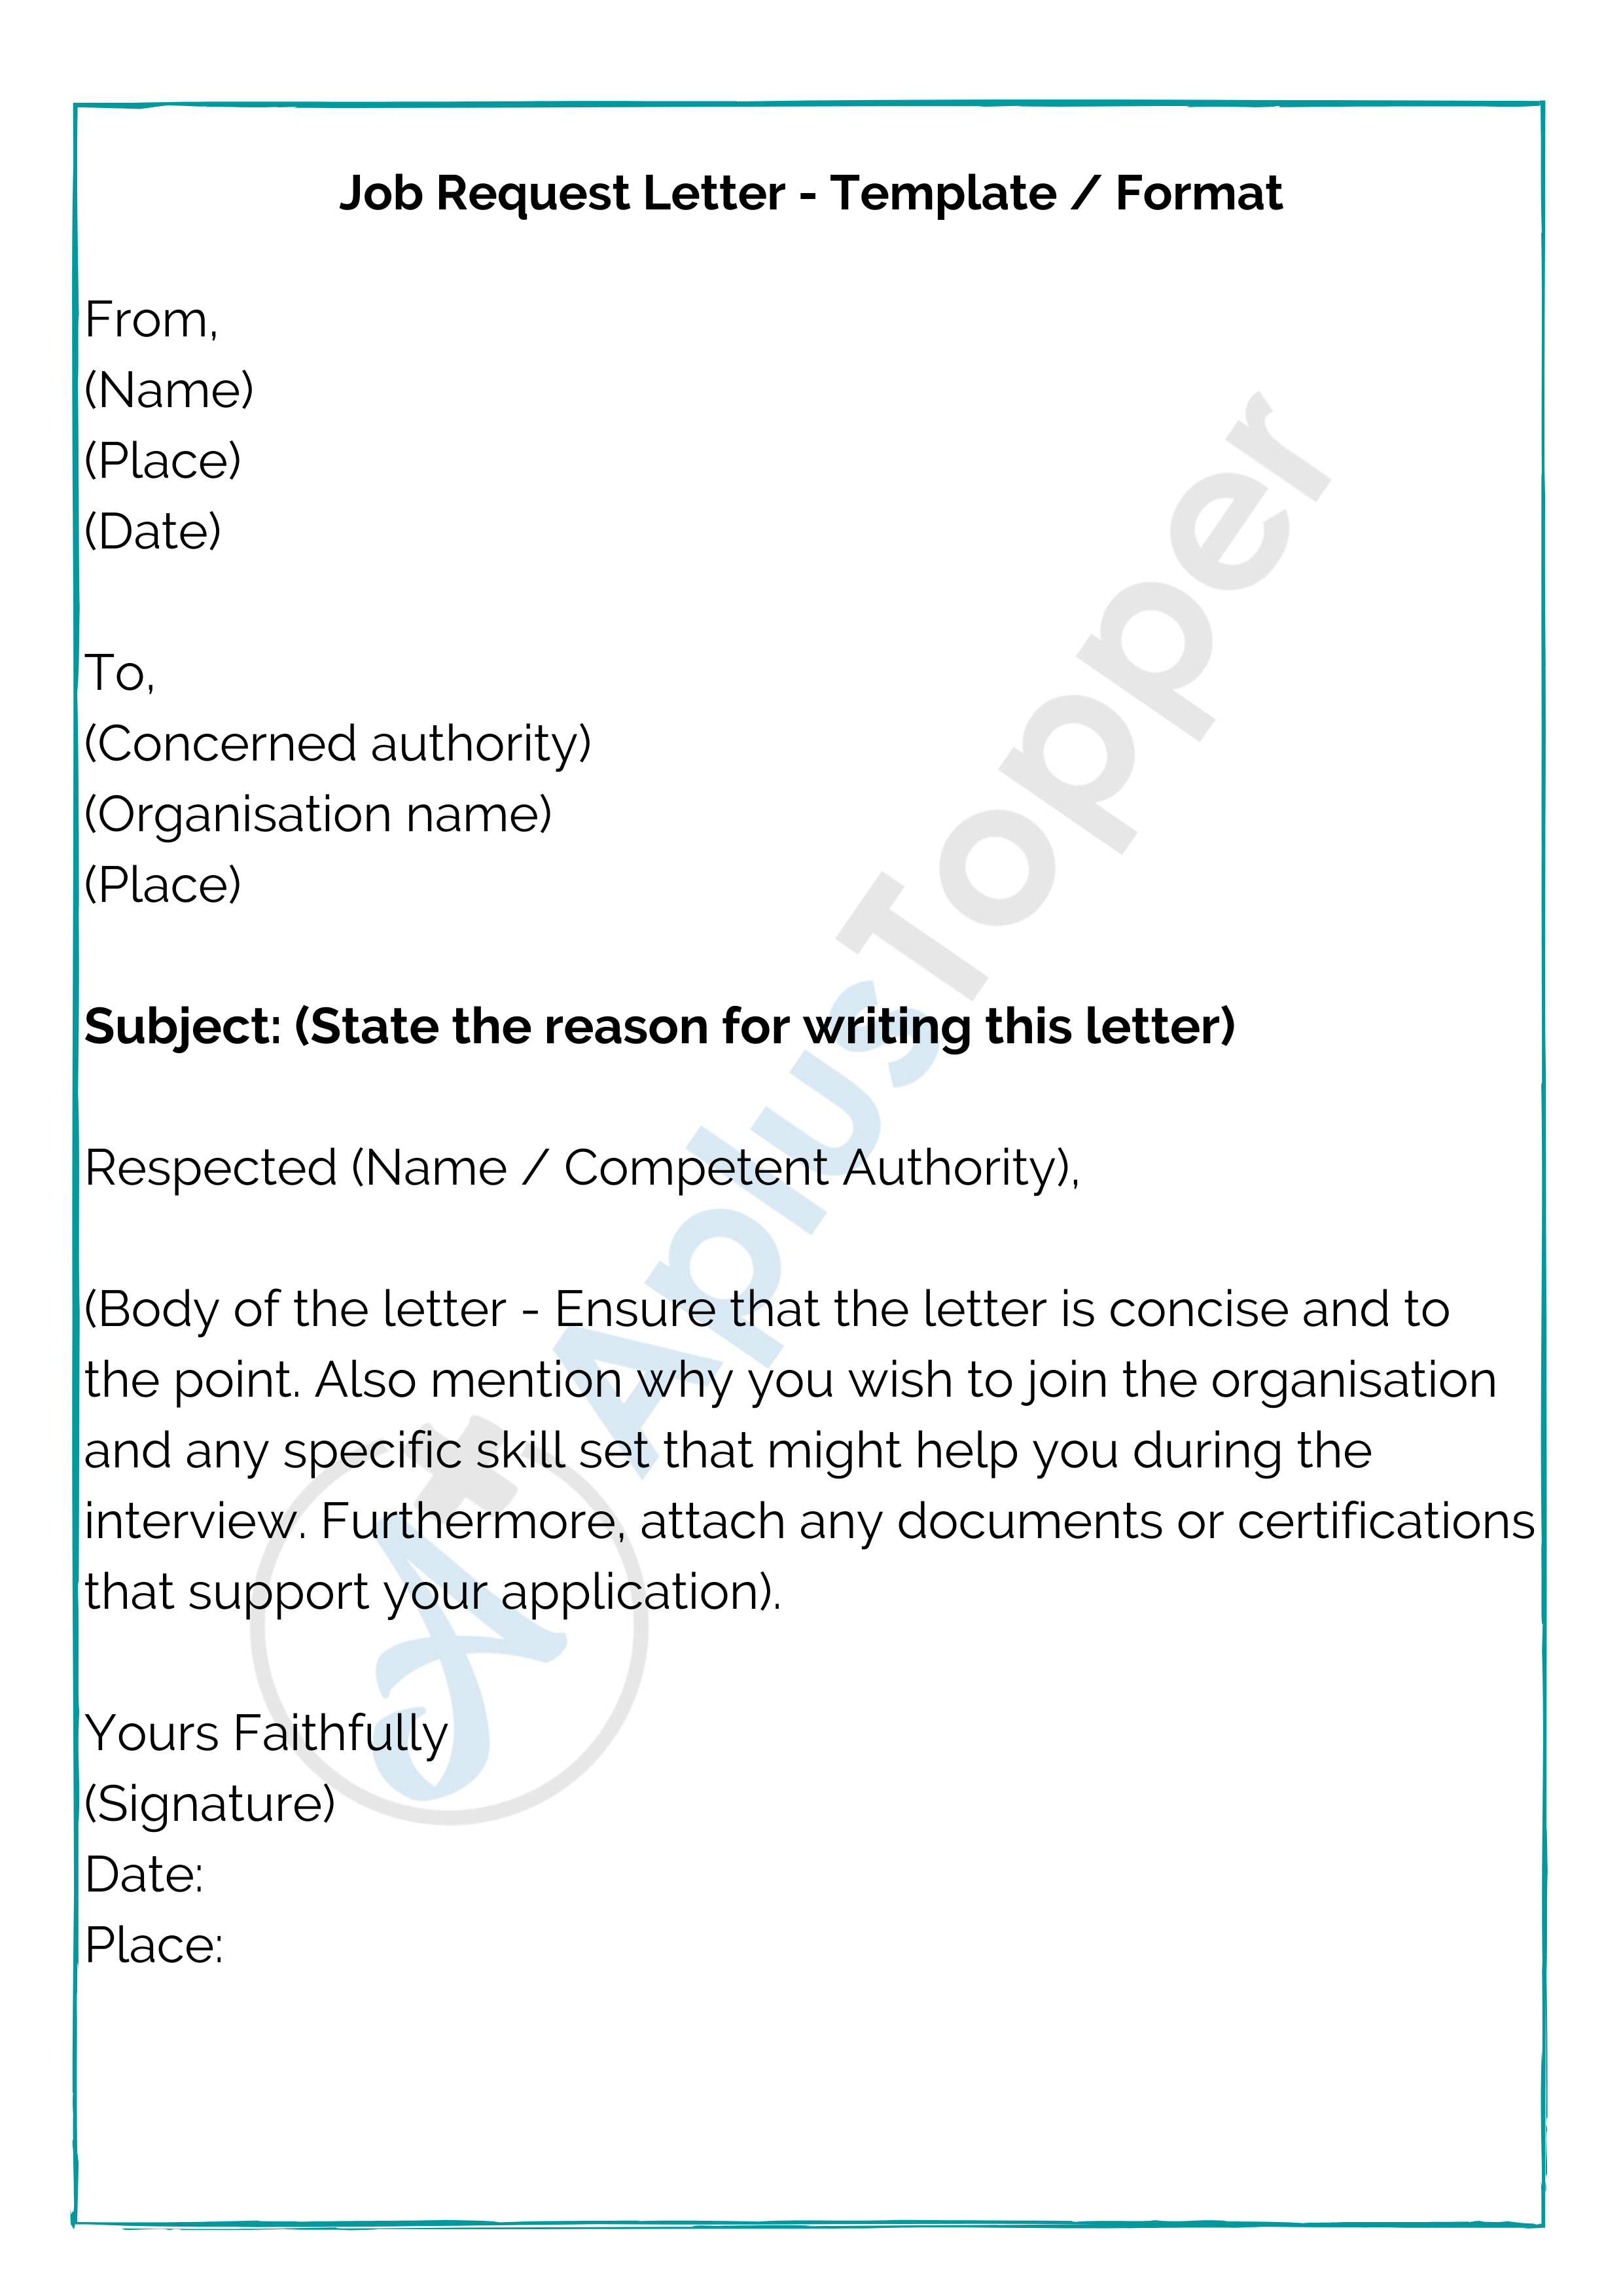 Job Request Letter How To Write Job Request Letter? Format, Sample